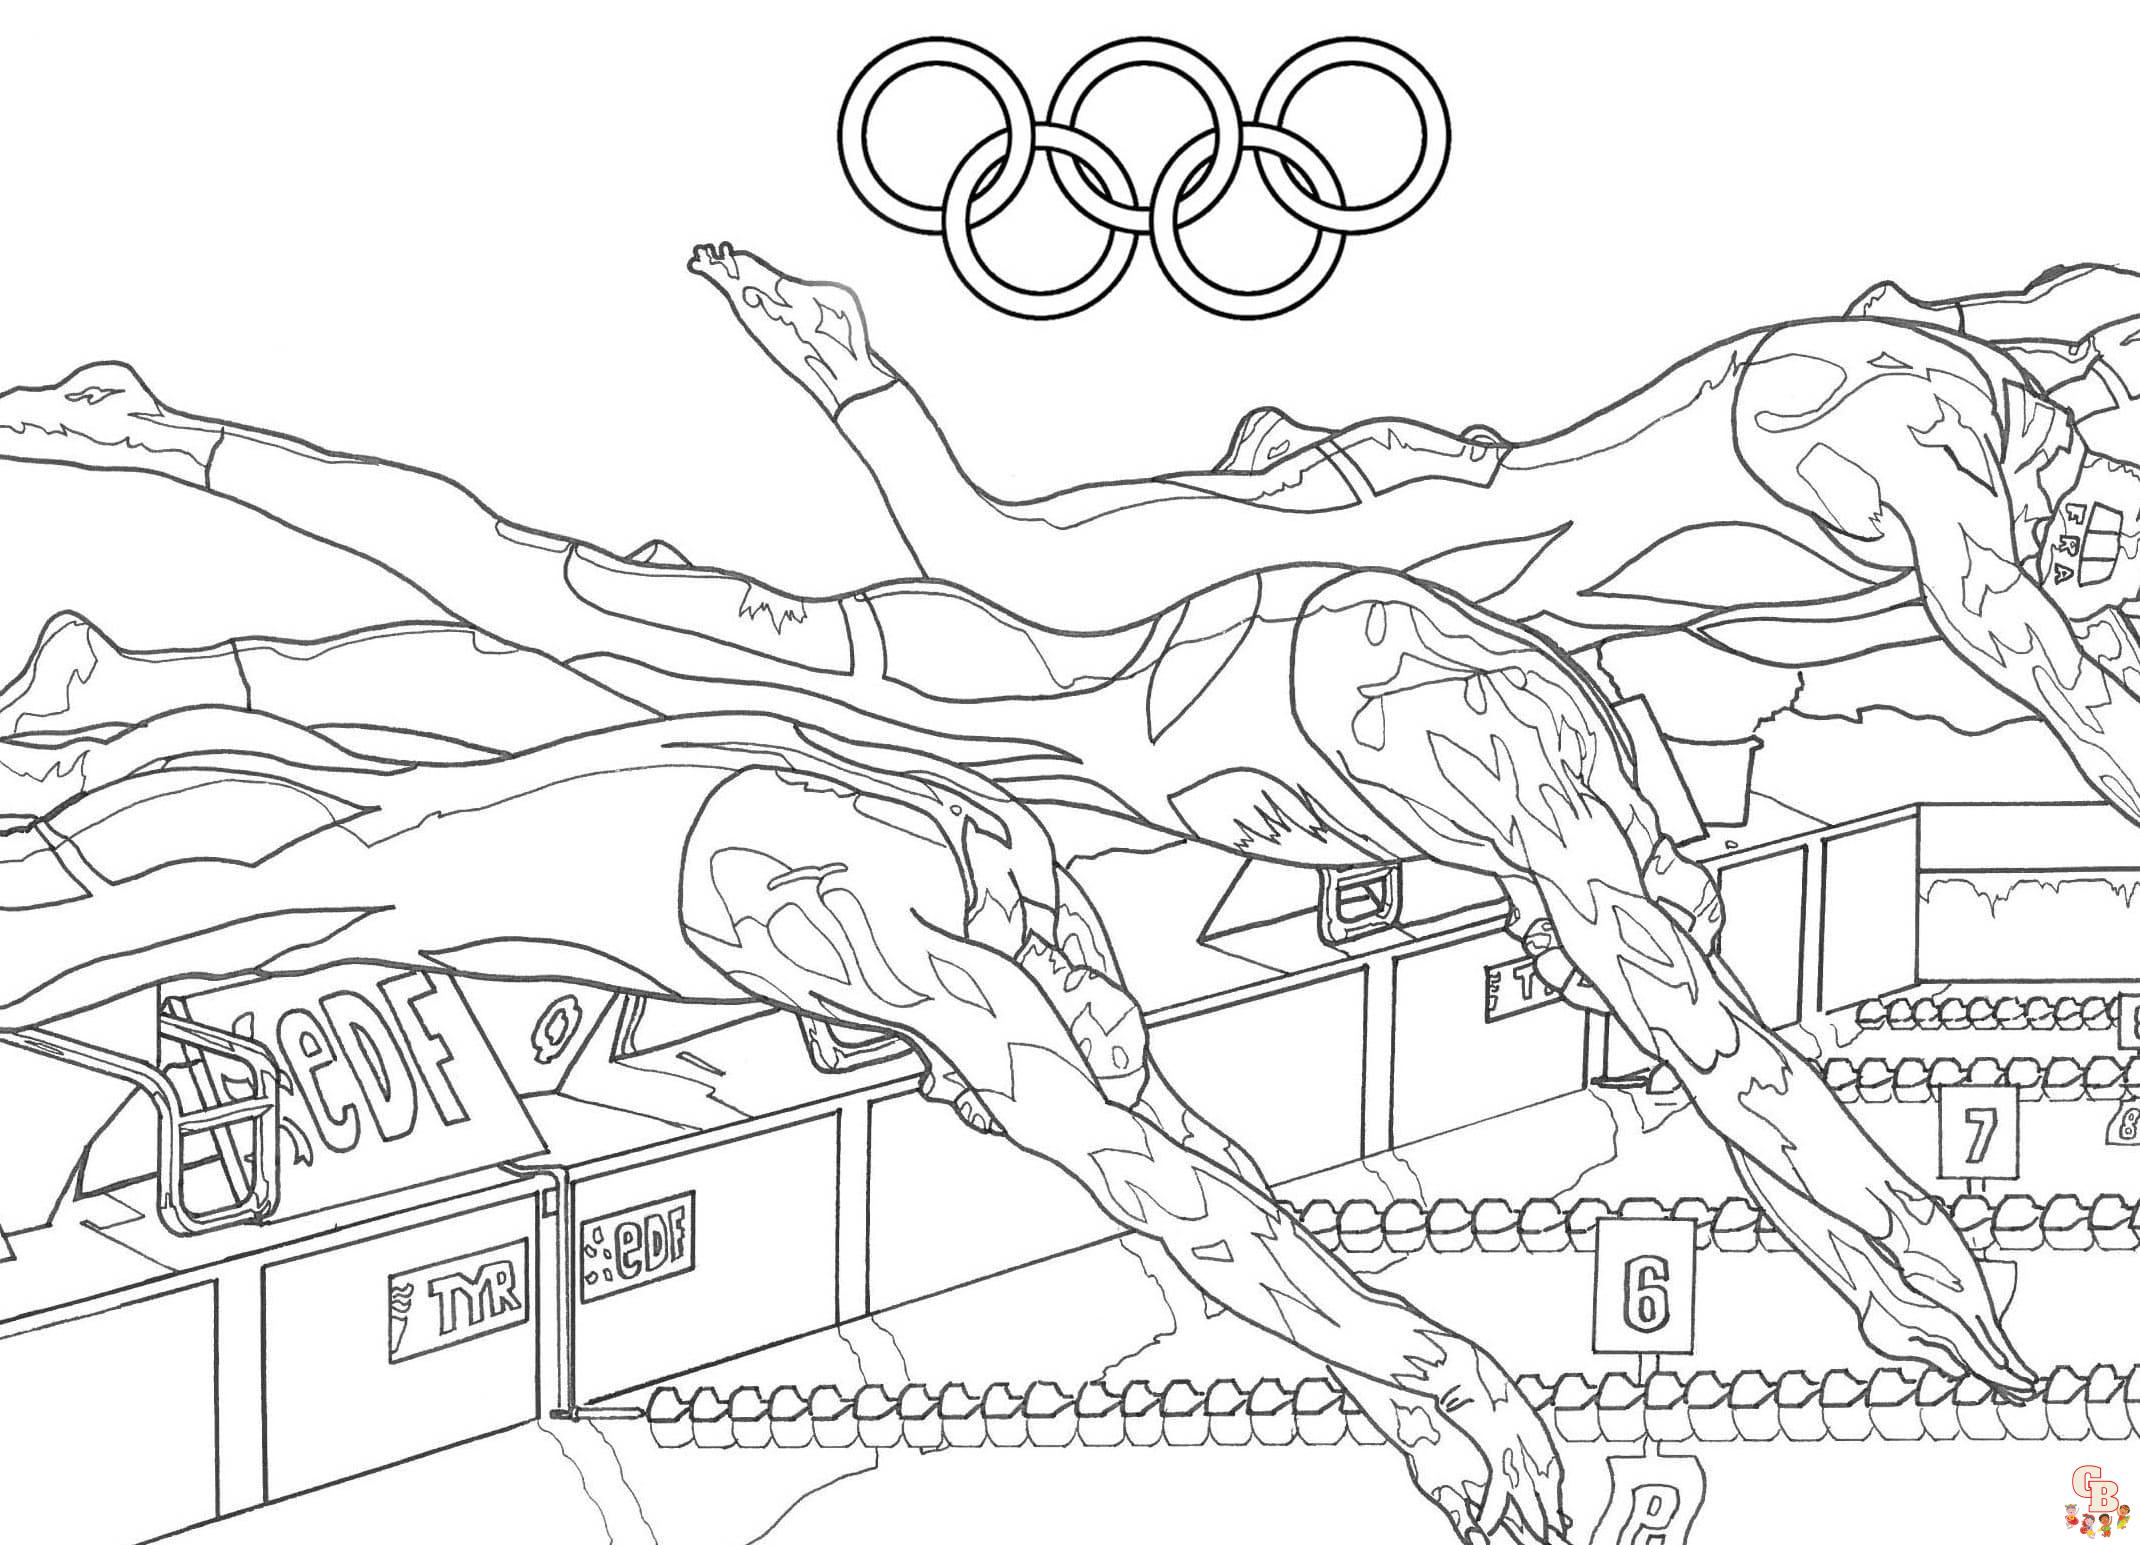 Printable olympic coloring sheets